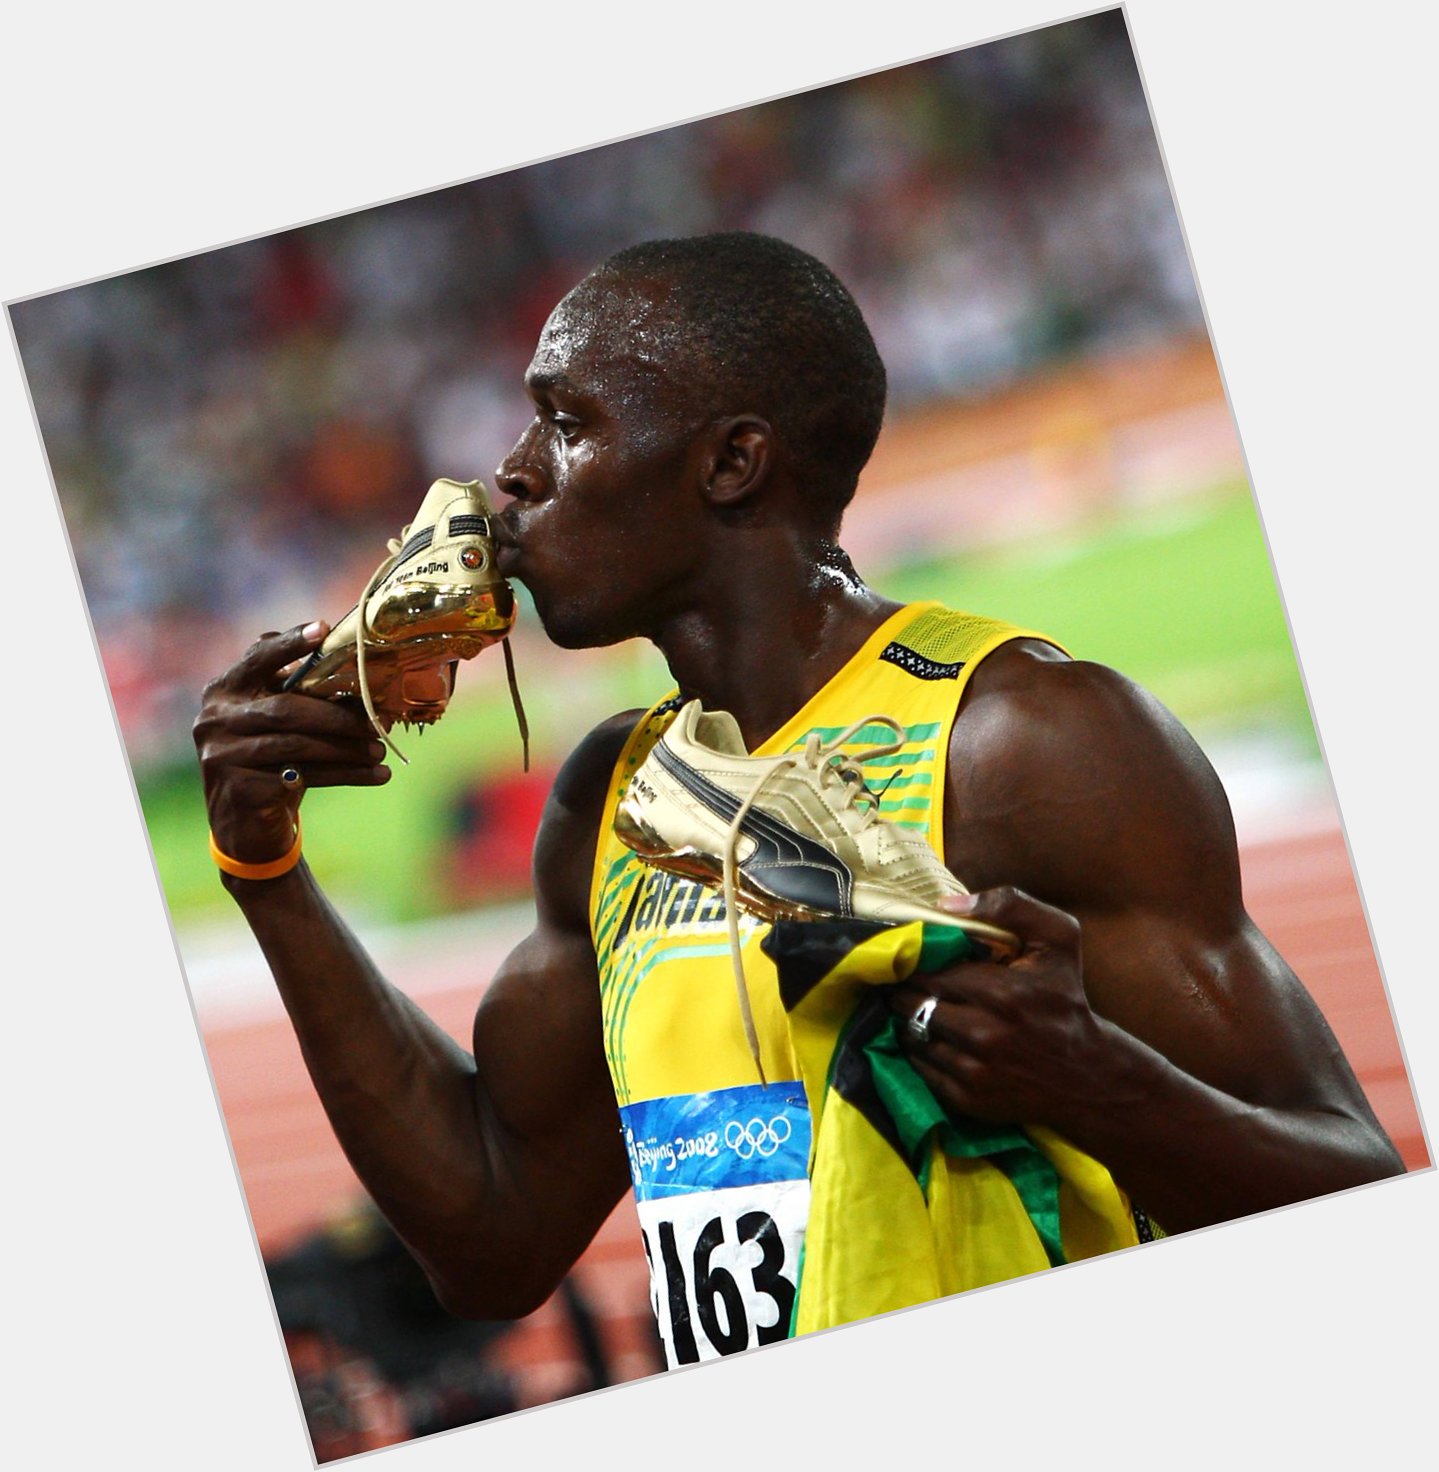    It took him just 9.58 seconds to run 100m.

Happy birthday to the world\s fastest man - Usain Bolt 